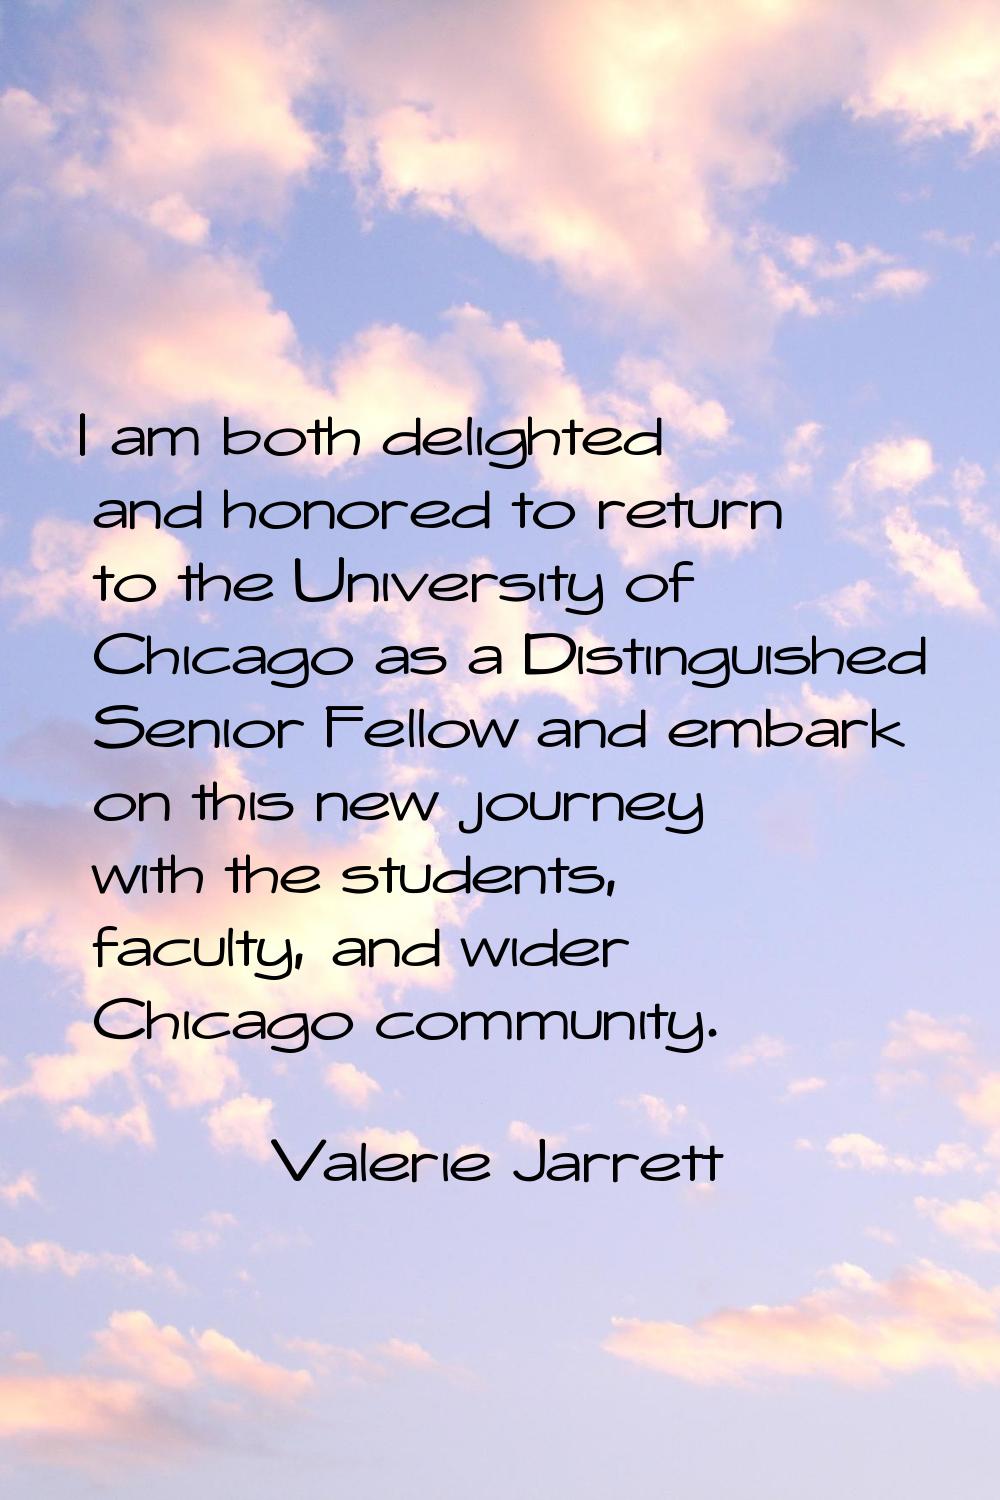 I am both delighted and honored to return to the University of Chicago as a Distinguished Senior Fe